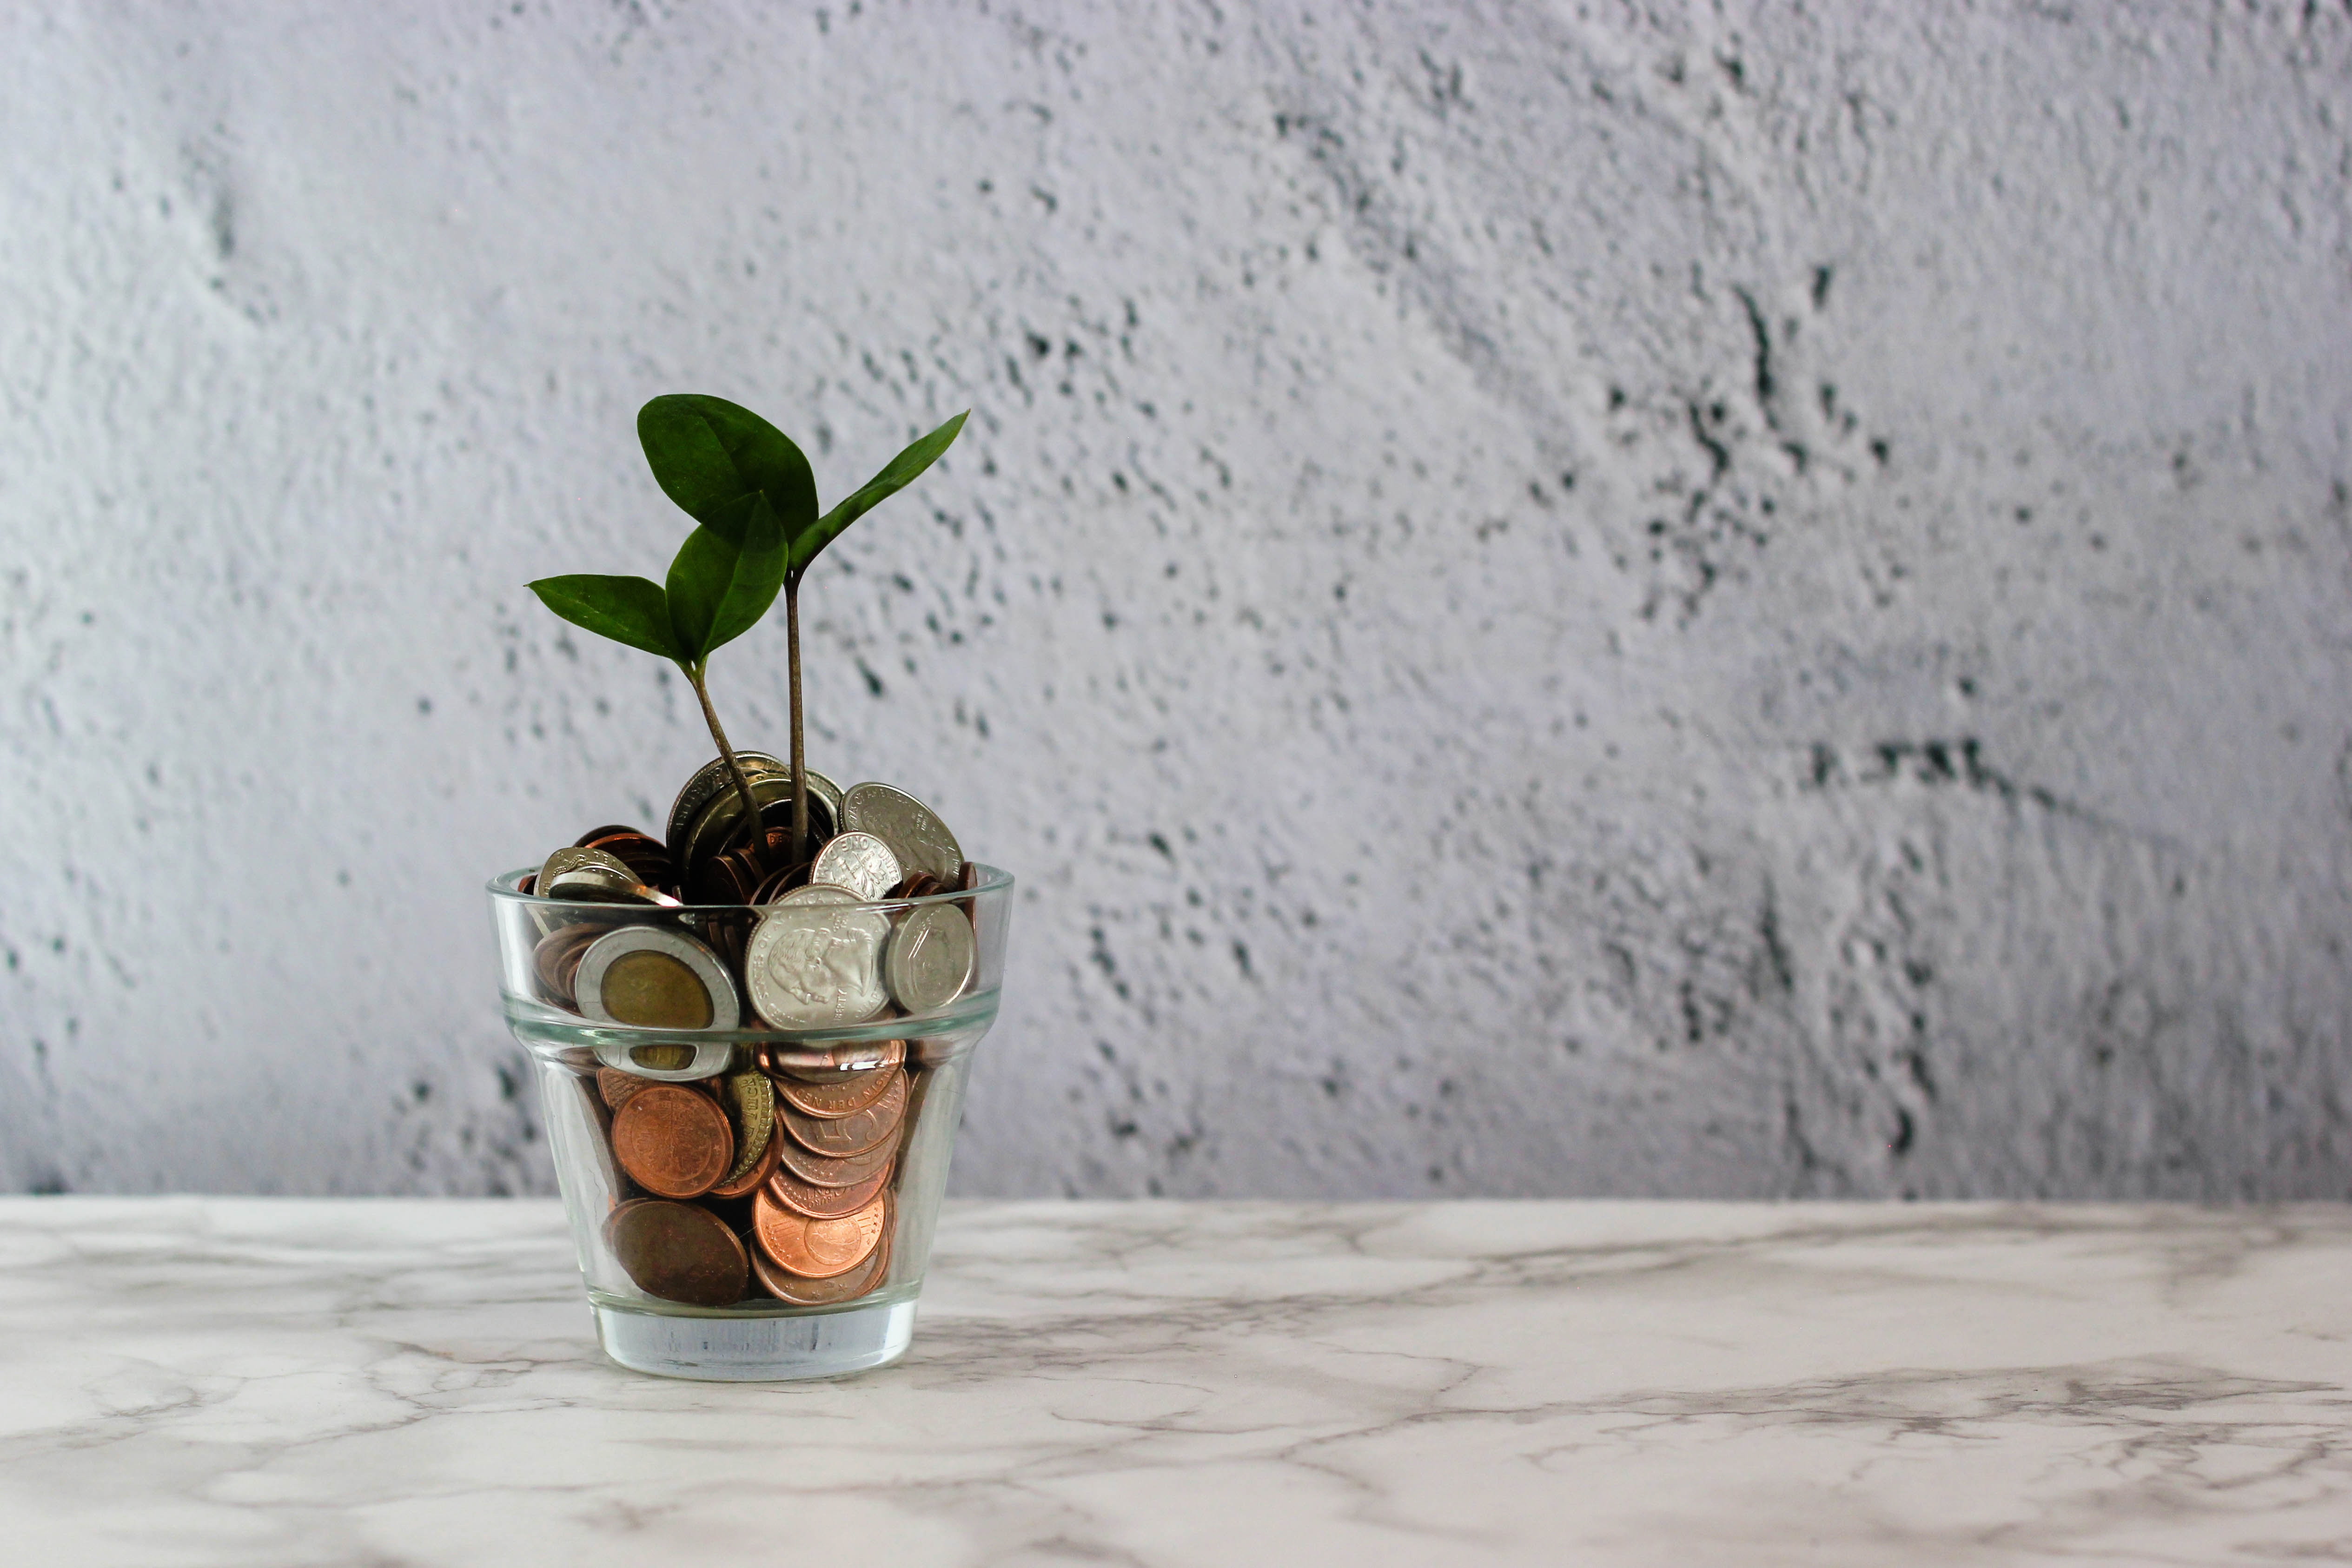 Coins in a glass with a plant